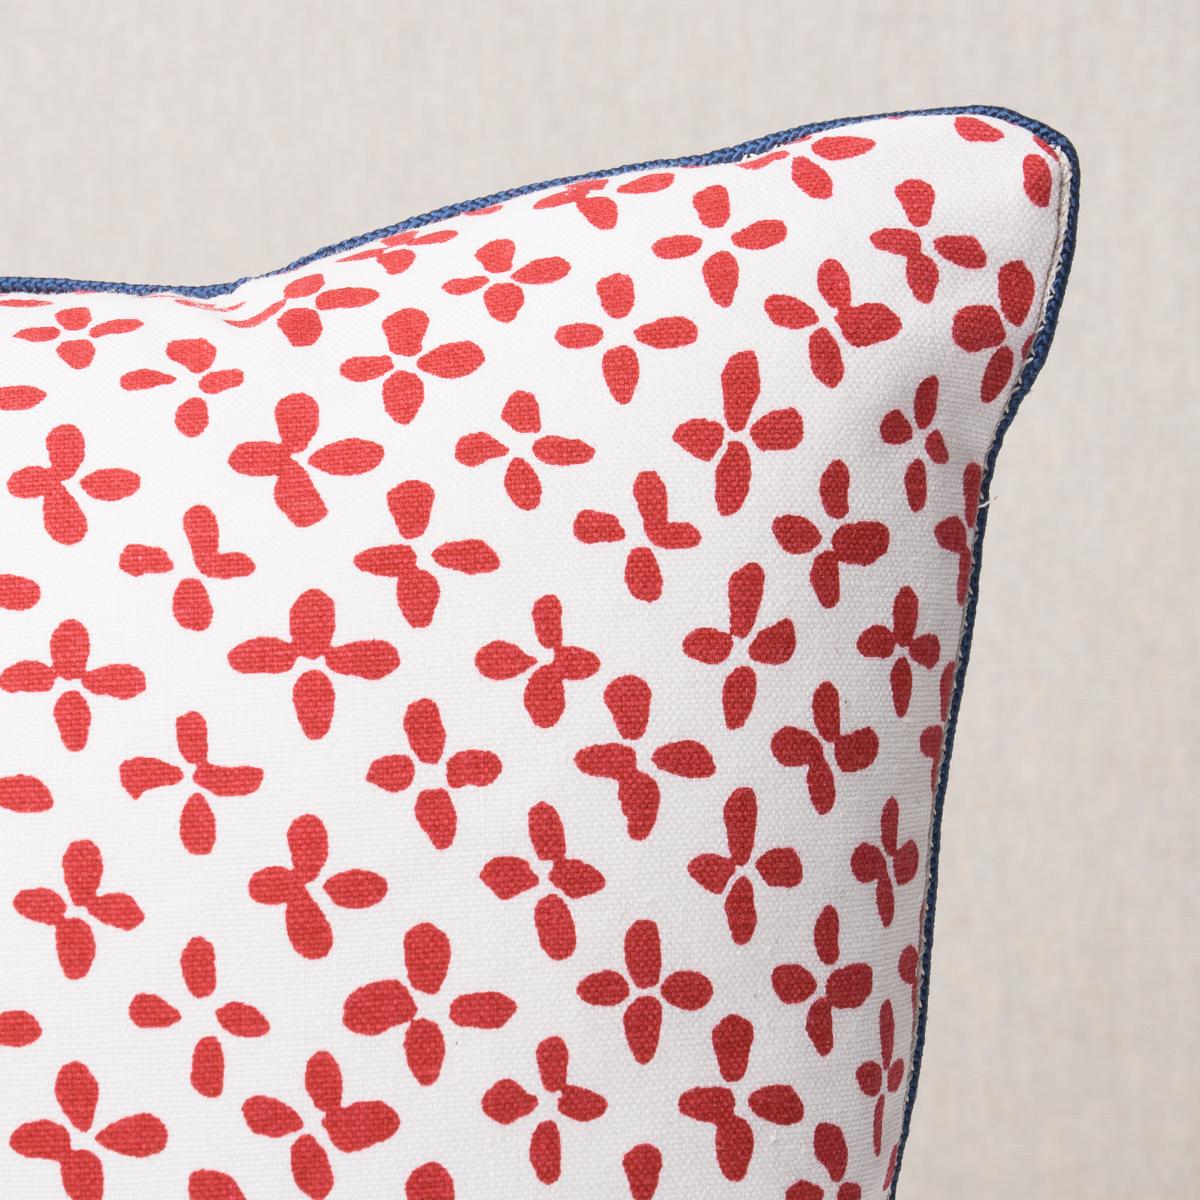 This pillow features Emerson. Inspired by a quatrefoil, Emerson in red is a fun small-scale print with a big personality. Imperfect by design, this casual cotton fabric has a lovely hand-painted feel. Pillow is finished with a welt in Cedric Cotton